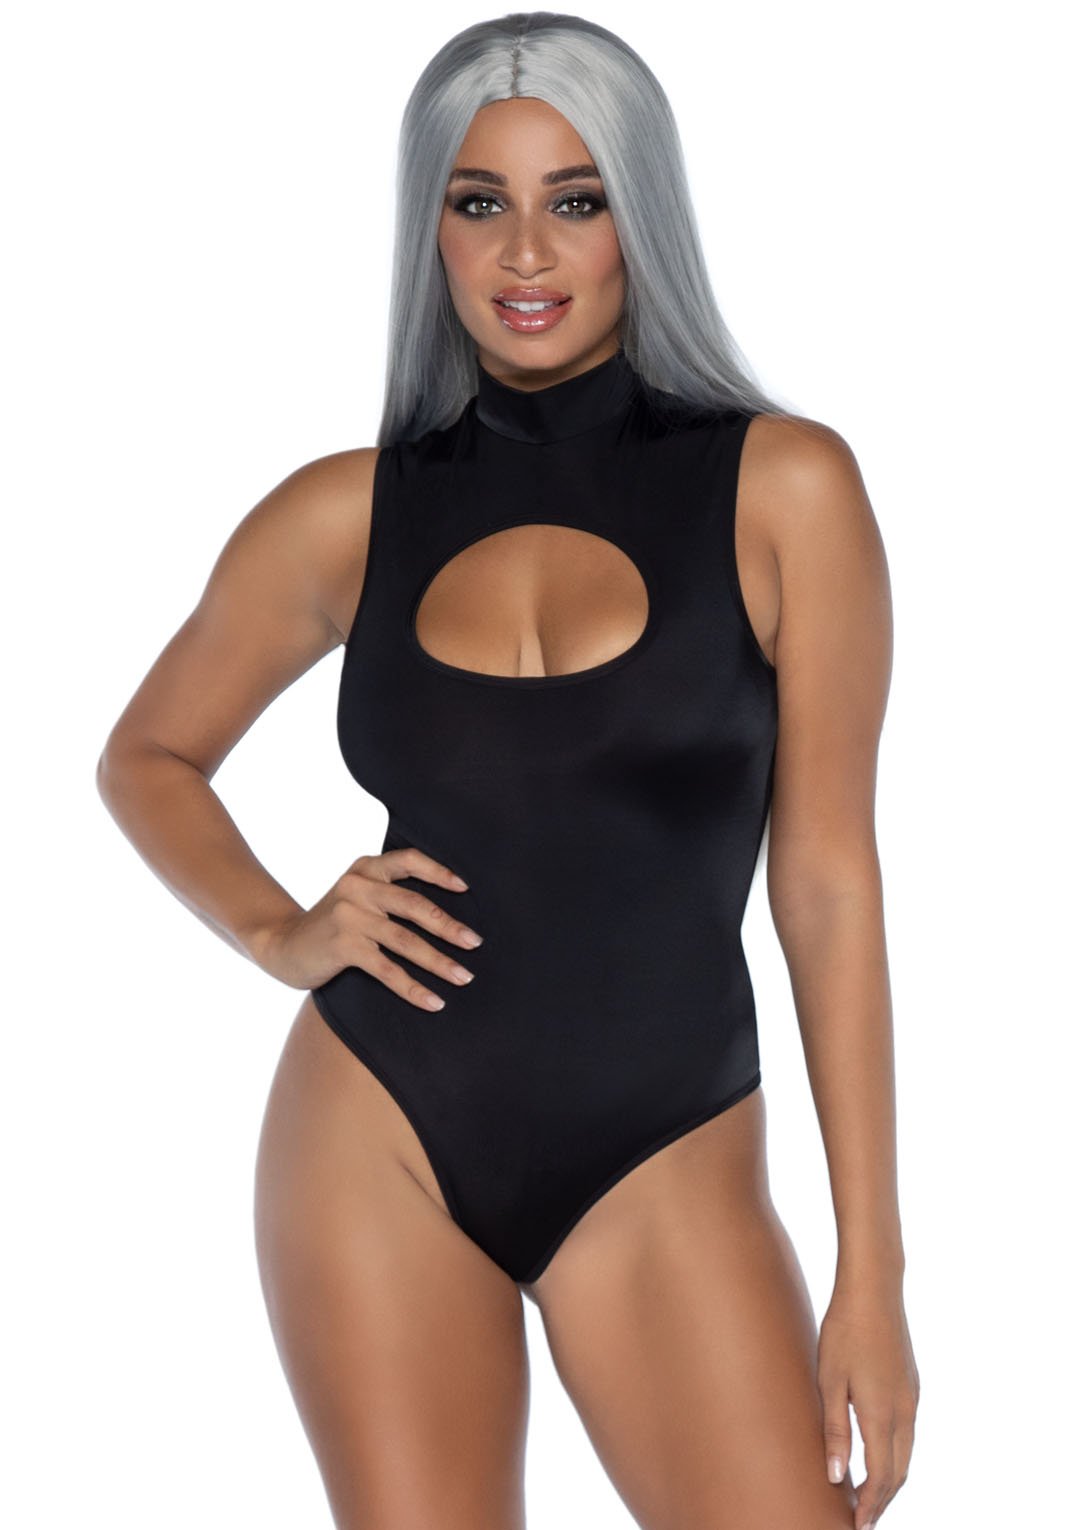 spandex bodysuit women, spandex bodysuit women Suppliers and